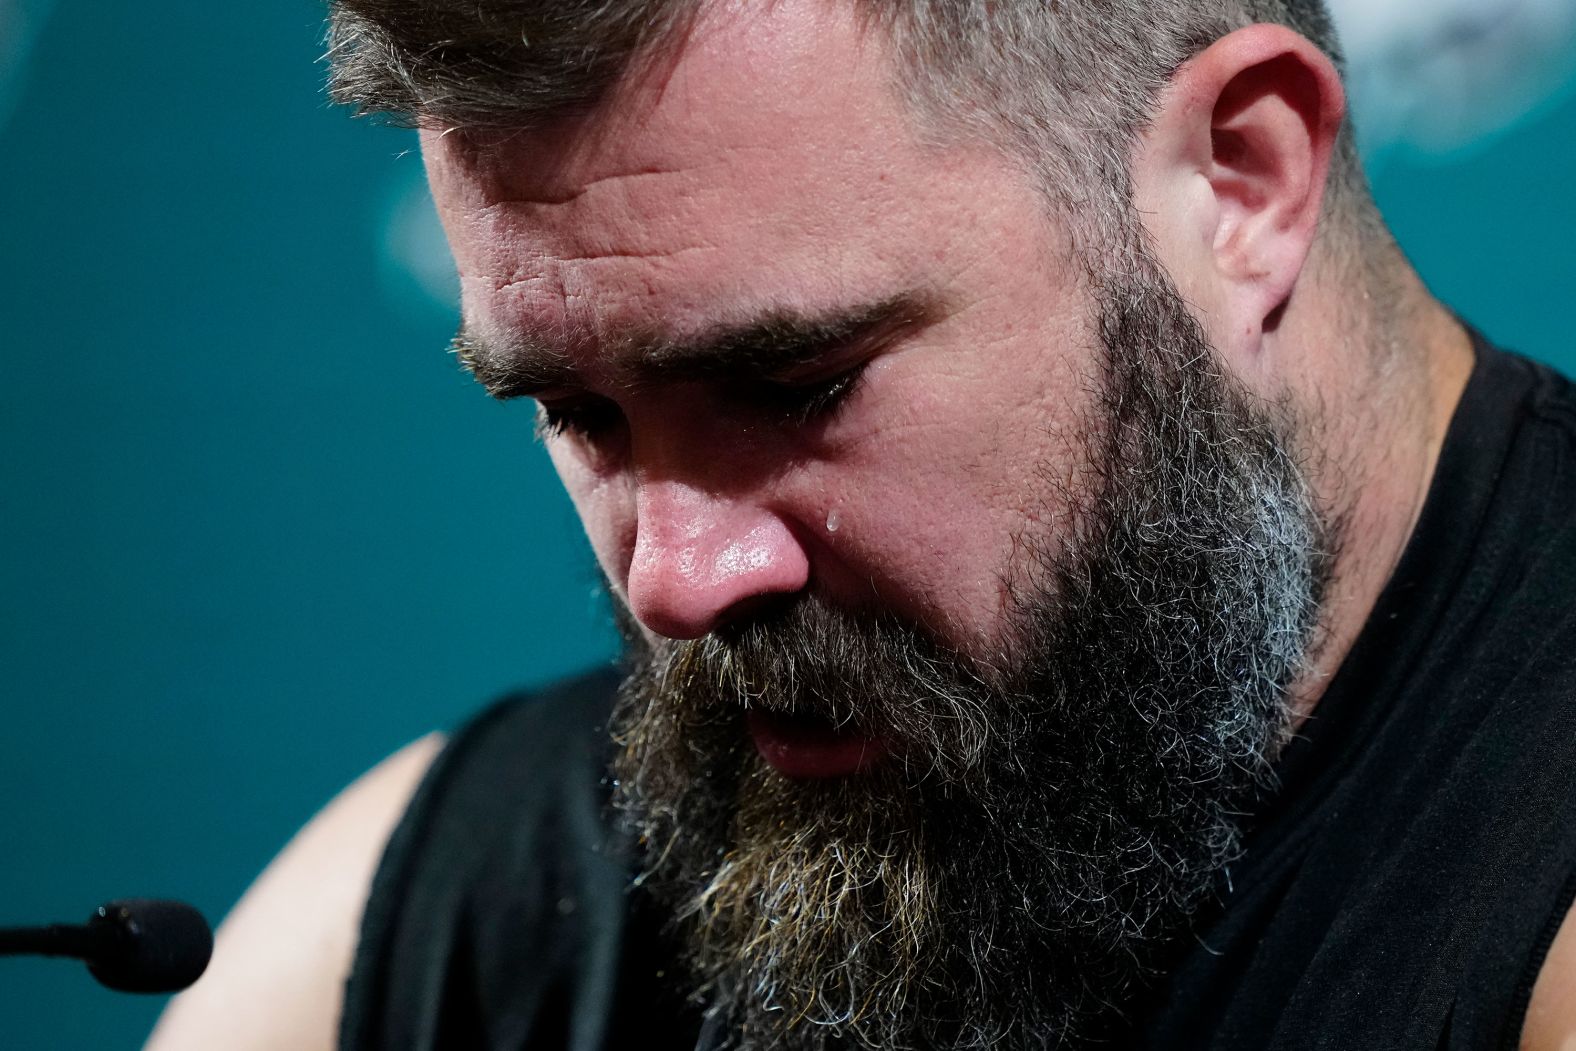 A tear falls down the cheek of Philadelphia Eagles center Jason Kelce during a news conference <a href="index.php?page=&url=https%3A%2F%2Fwww.cnn.com%2F2024%2F03%2F04%2Fsport%2Fjason-kelce-retires-nfl-eagles-spt-intl%2Findex.html" target="_blank">announcing his retirement</a> on Monday, March 4. Kelce, 36, is a seven-time Pro Bowler and six-time All-Pro. He spent his entire 13-year career with the Eagles, winning a Super Bowl with them in 2018.